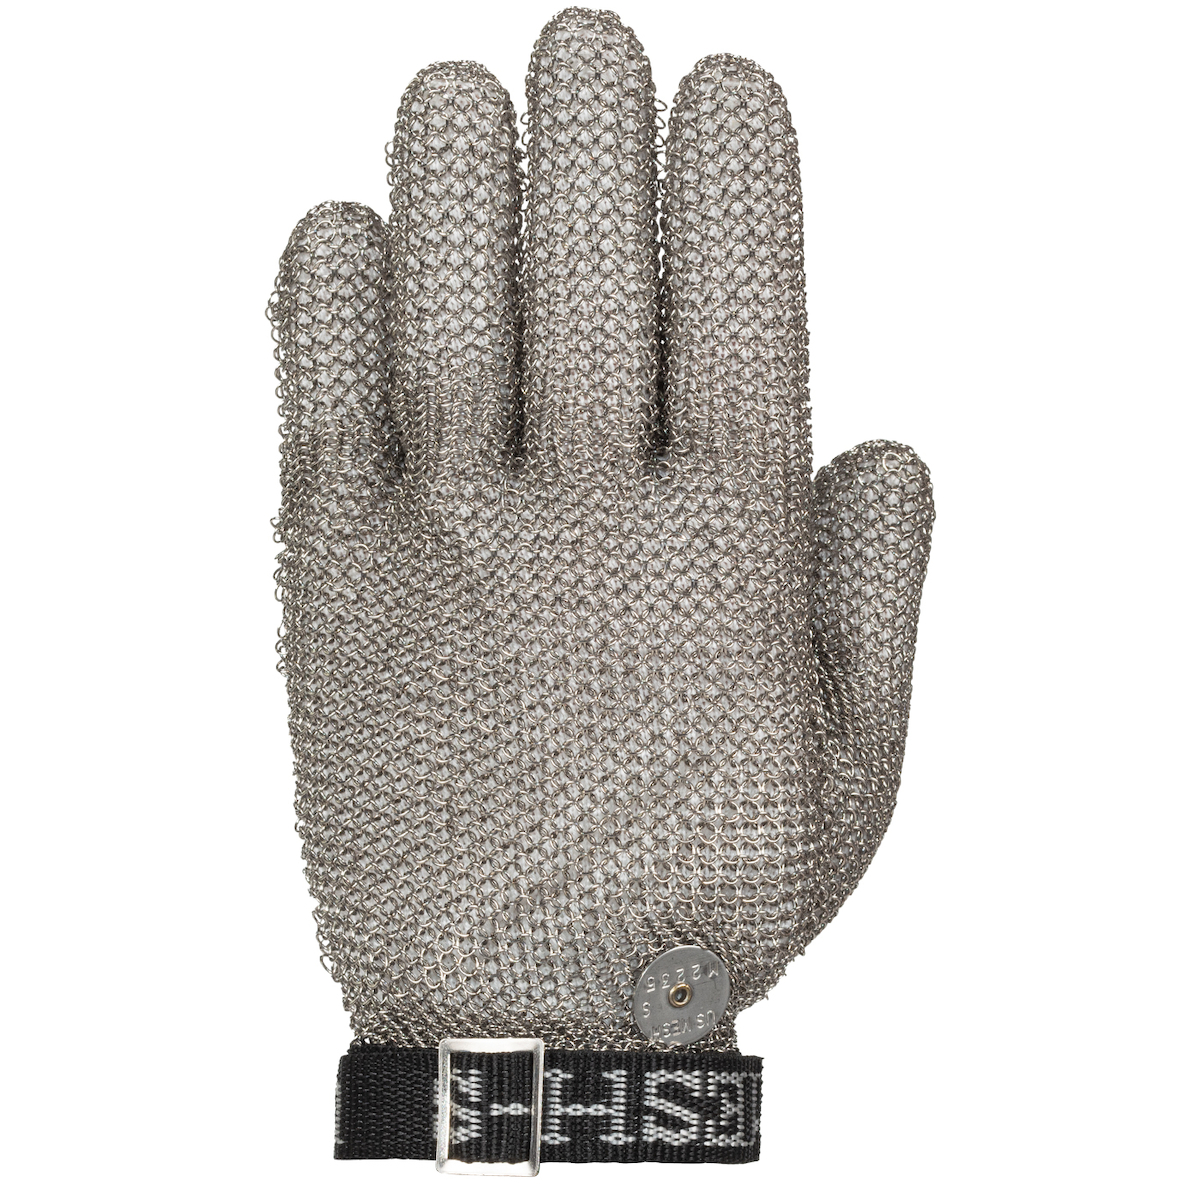 USM-1105 US Mesh® Stainless Steel Mesh Glove with Adjustable Strap - Wrist Length